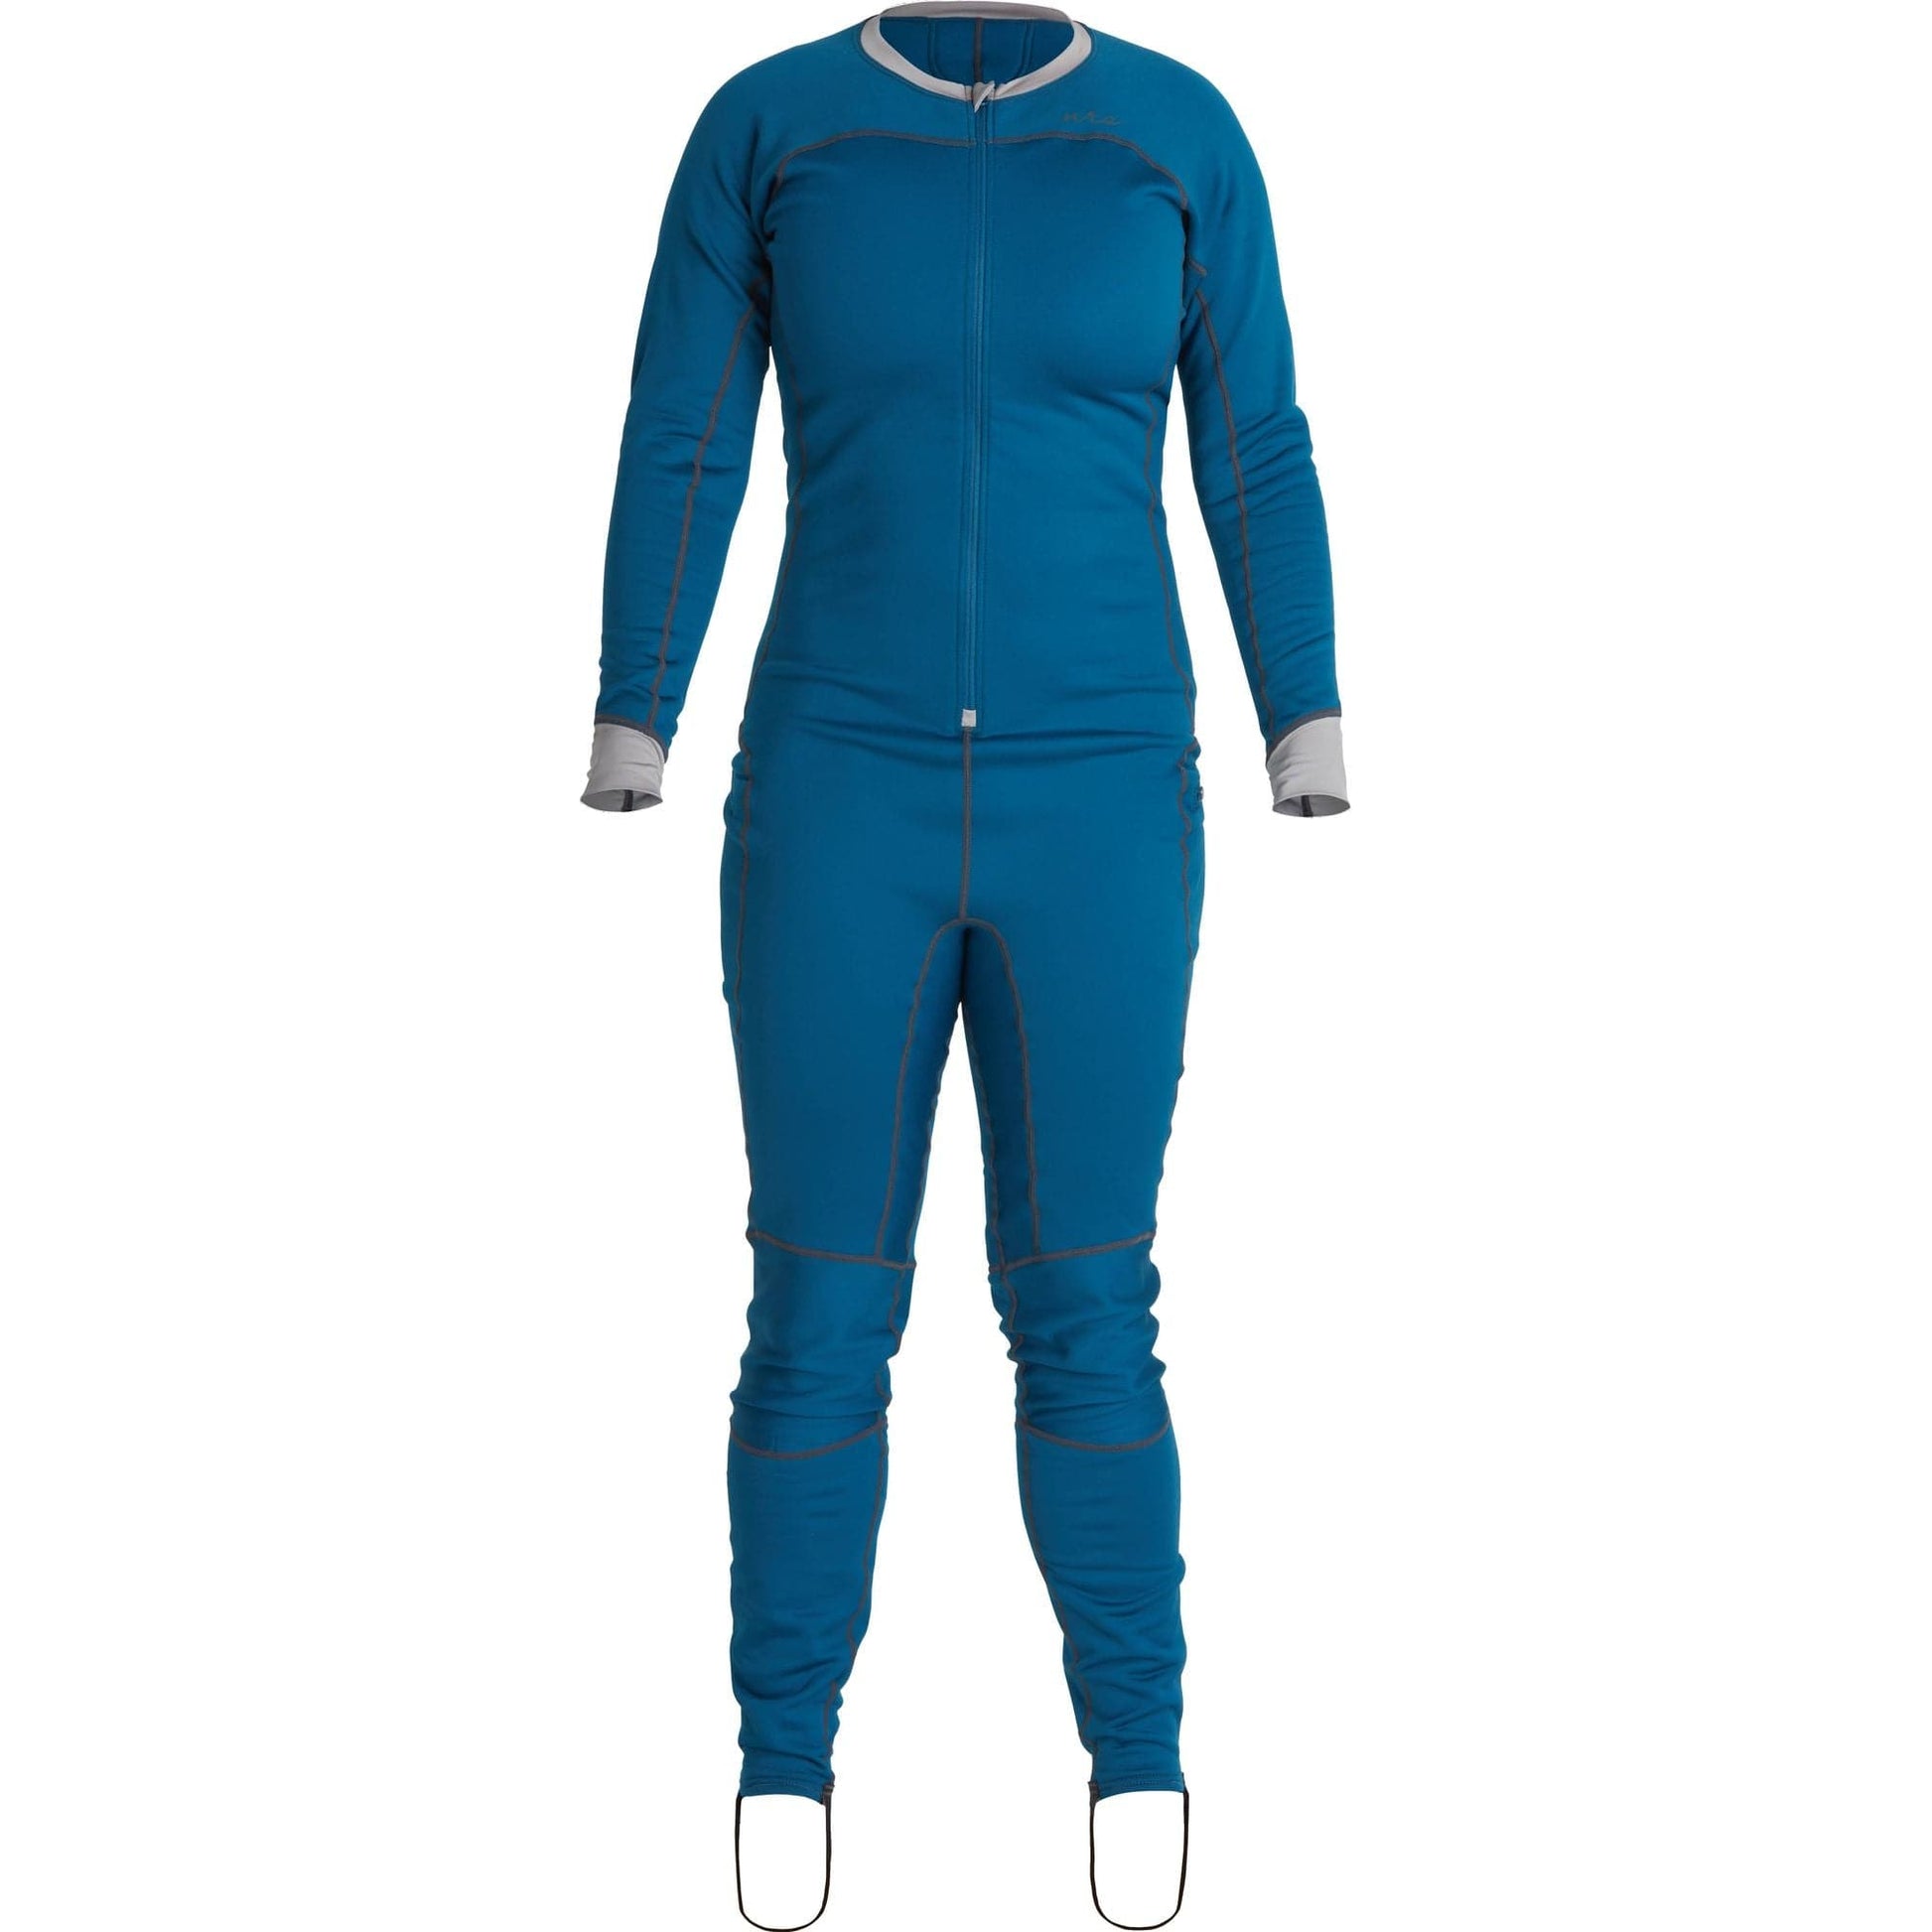 A cozy and comfortable NRS Expedition Union Suit - Women's, perfect for female paddlers, showcased on a white background.